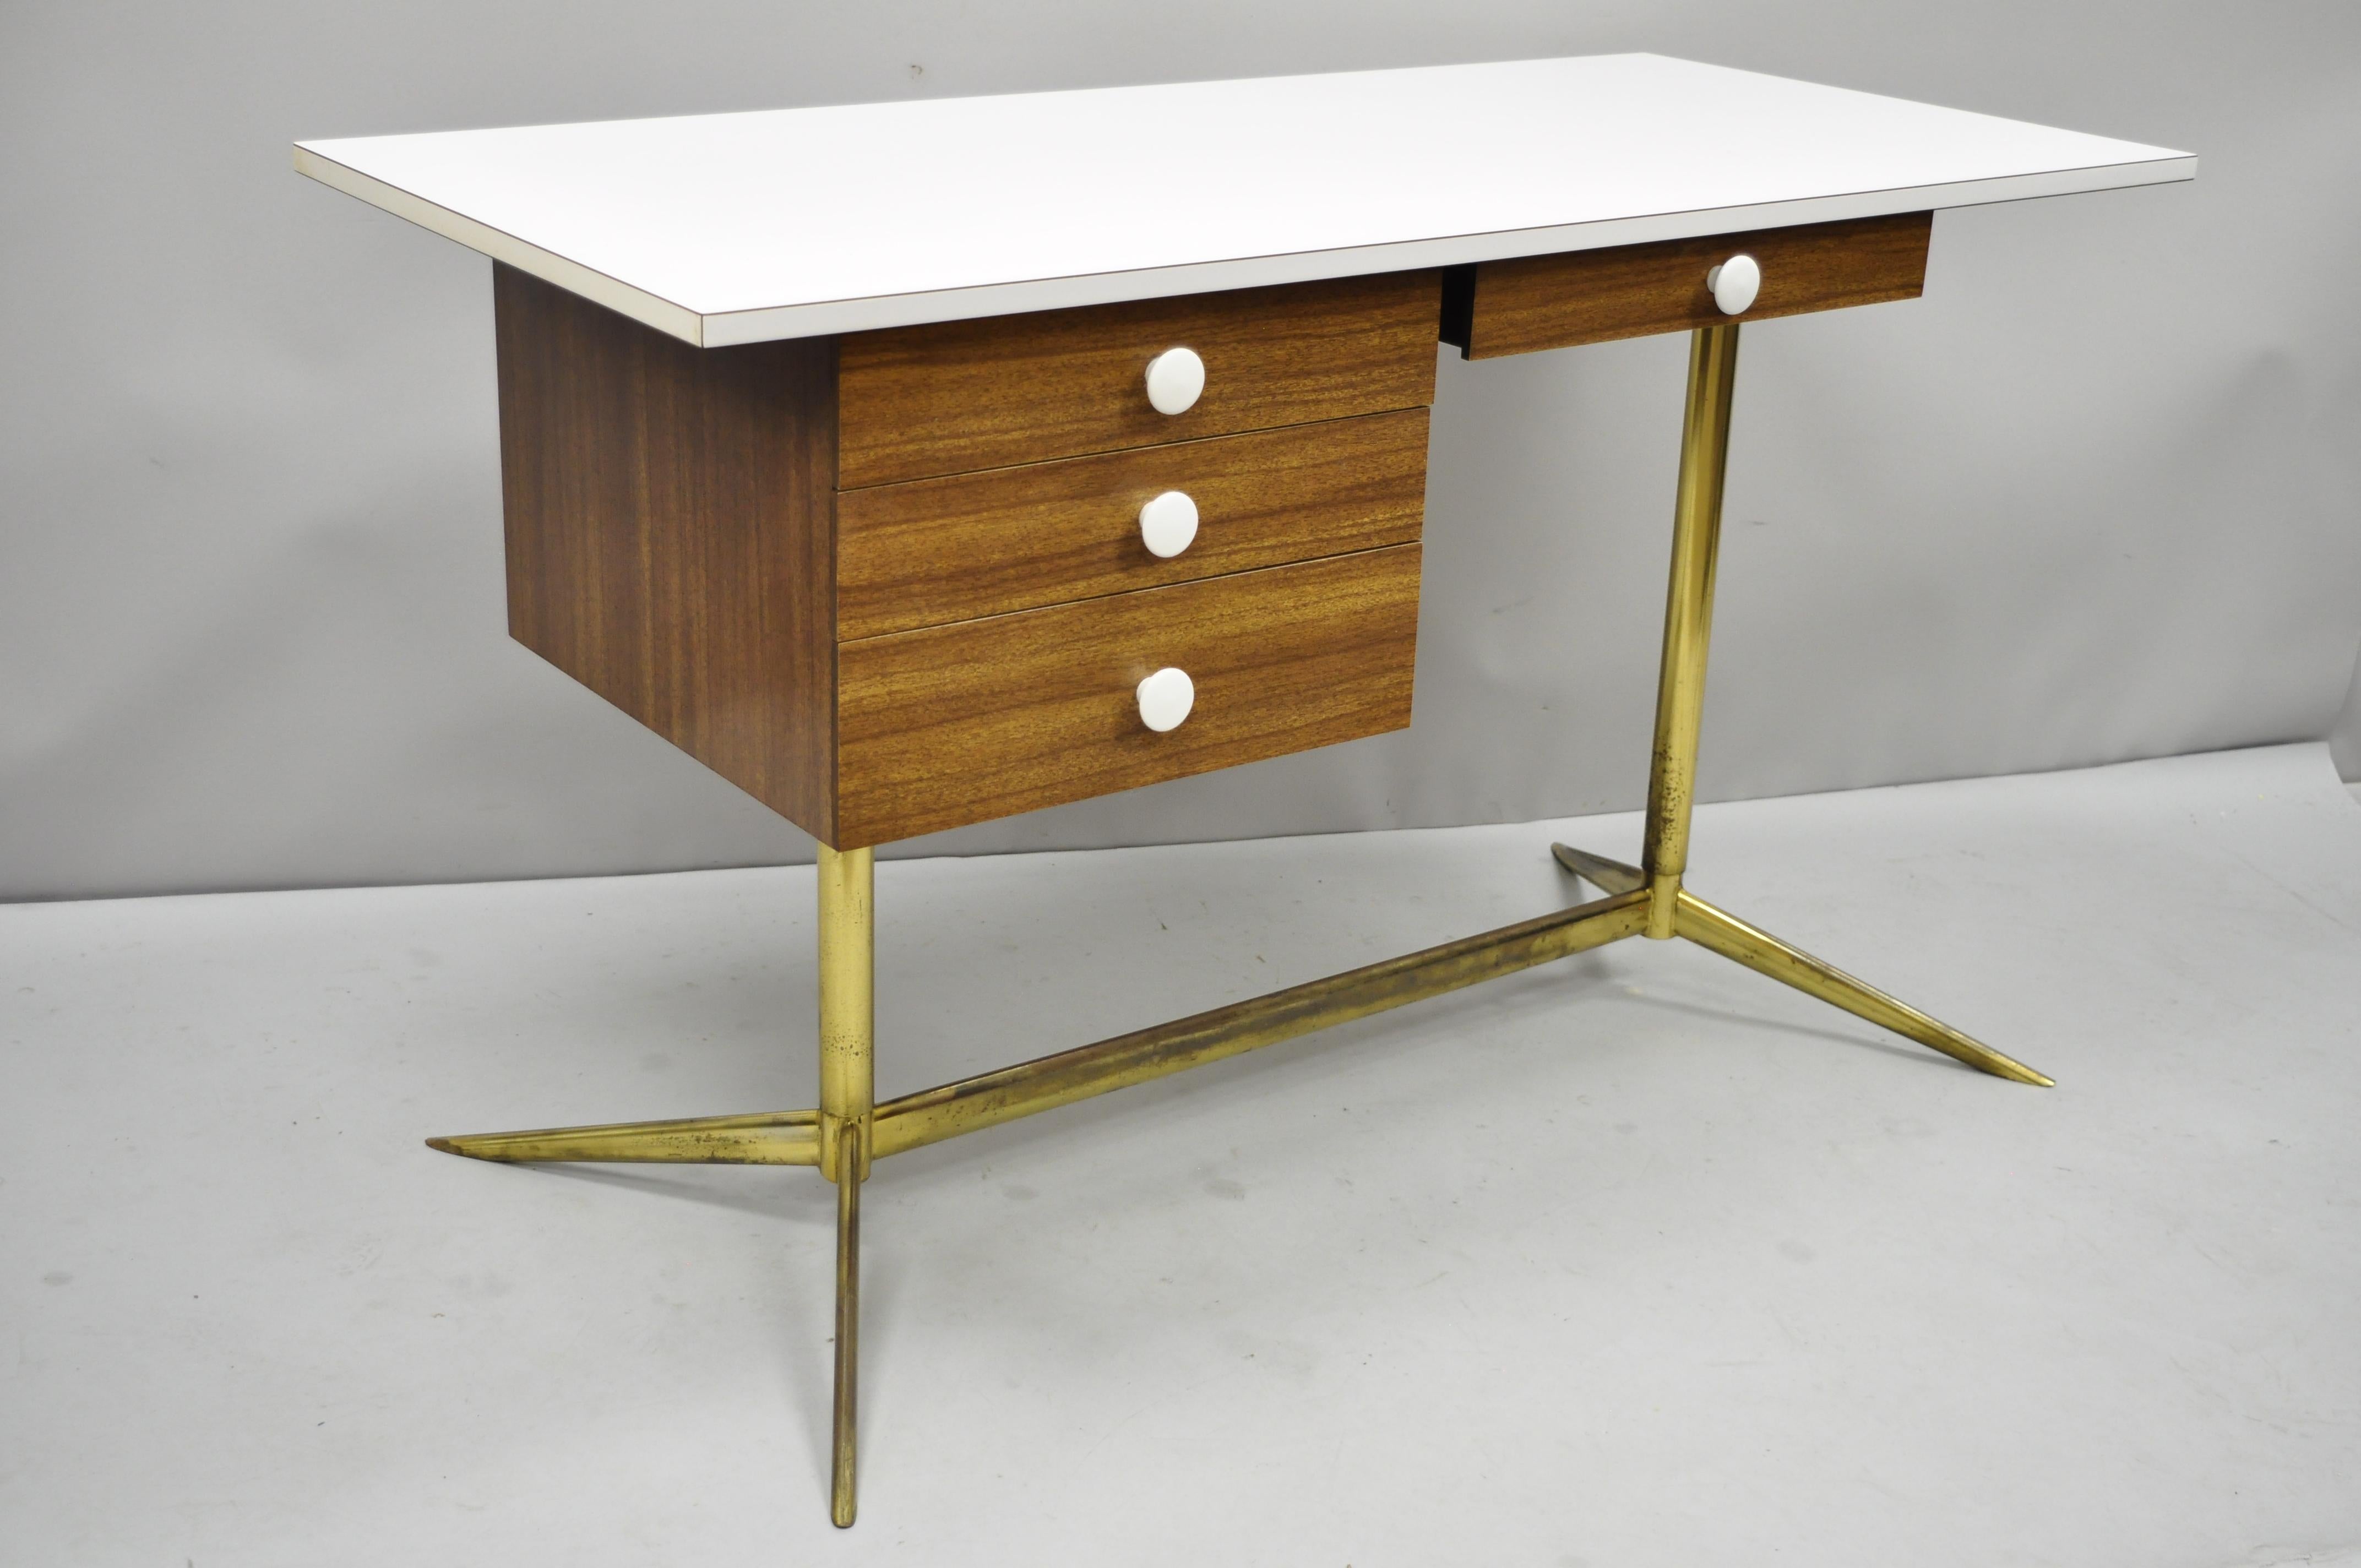 Vintage Mid-Century Modern Atomic Era brass base laminate Italian style writing desk. Item features white laminate/formica top, brass plated metal base, wood grain laminate/formica, clean modernist lines, sleek sculptural form, circa 1960s.